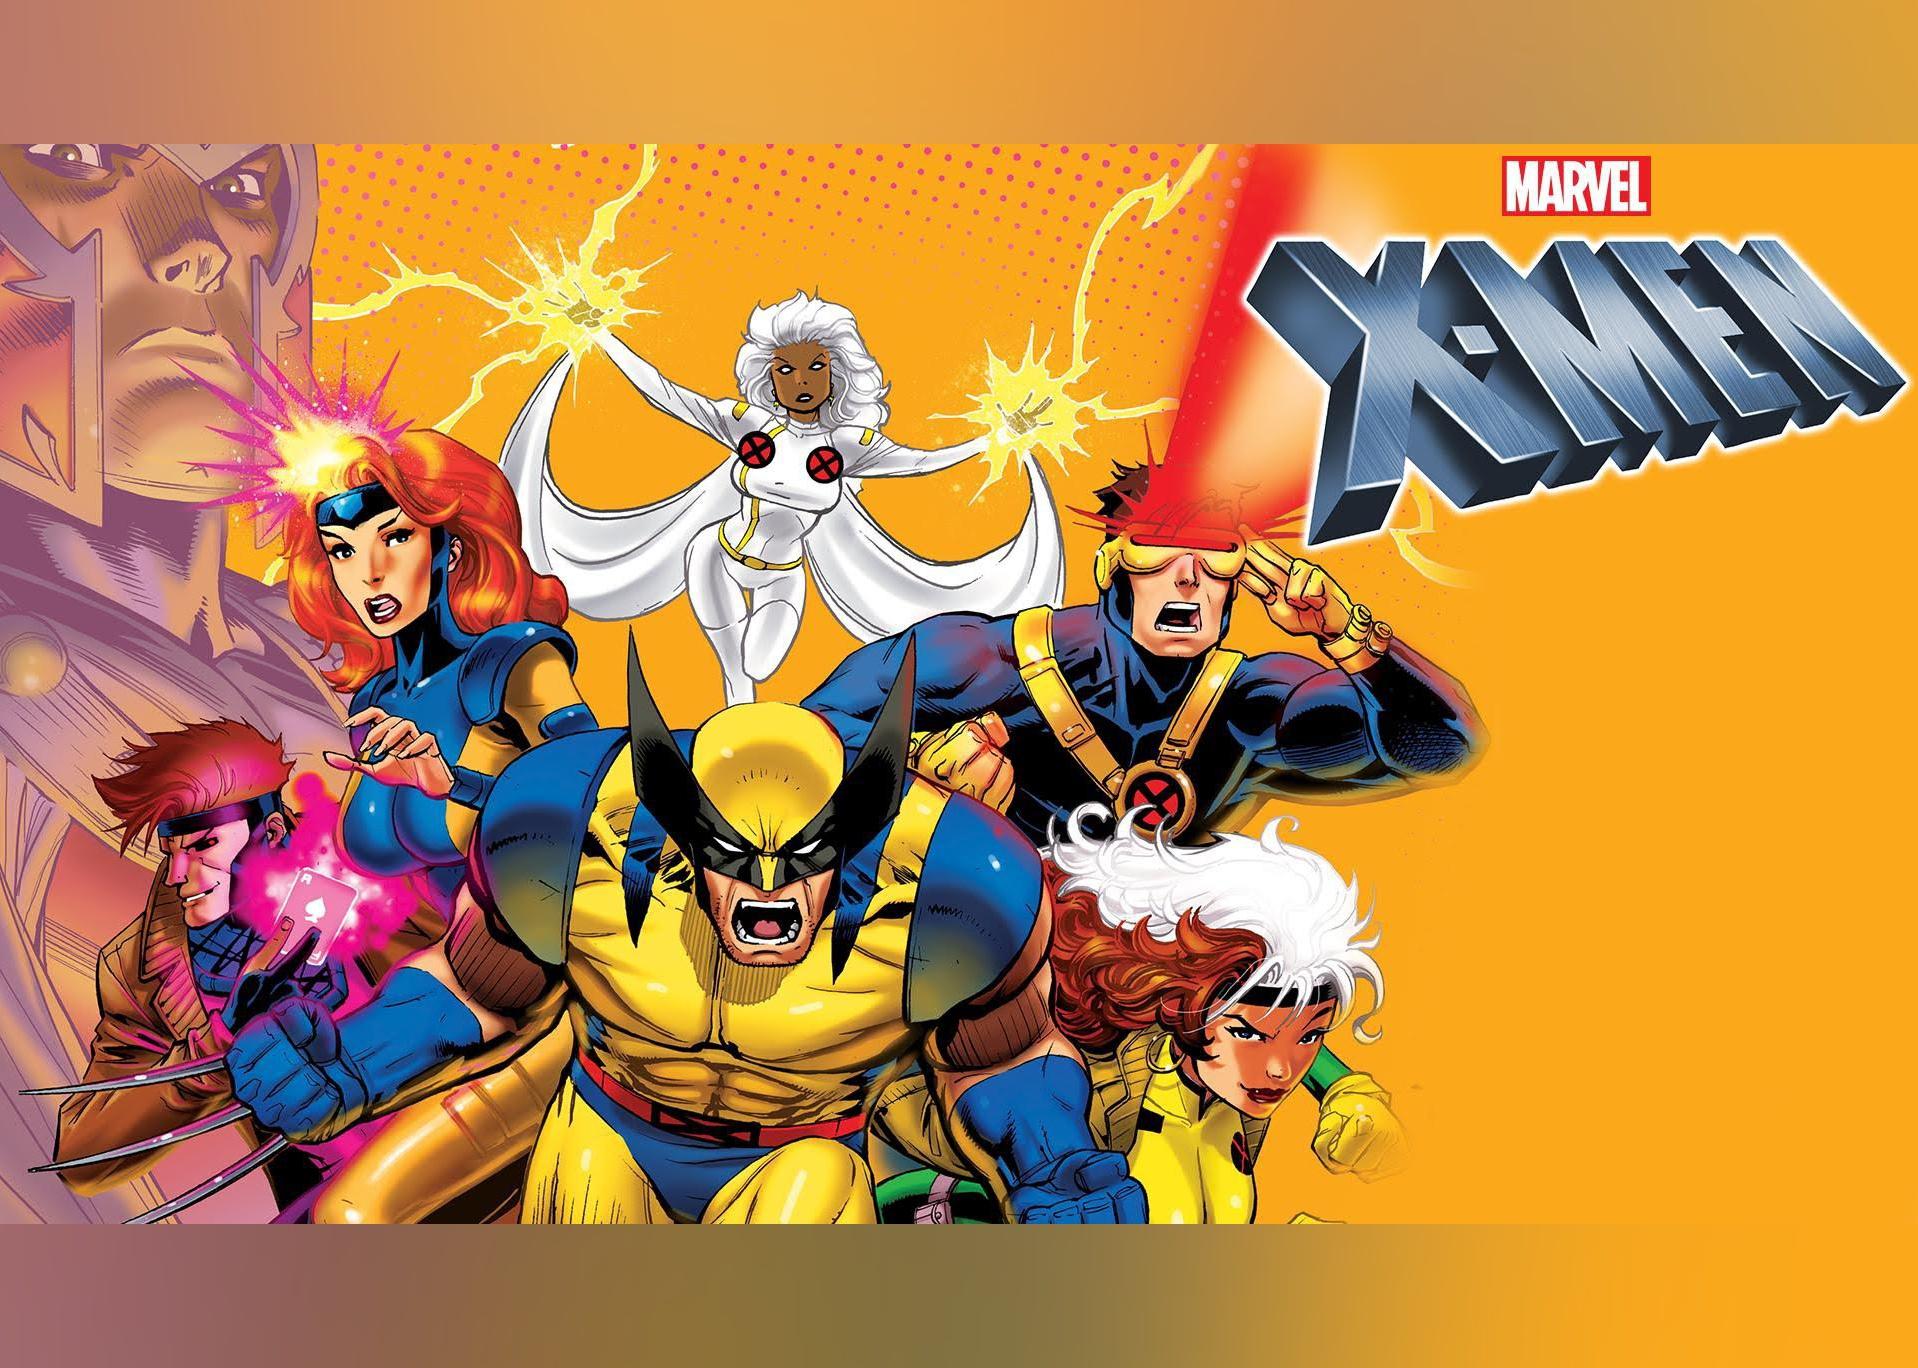 A marketing image for The X-Men animated series. 